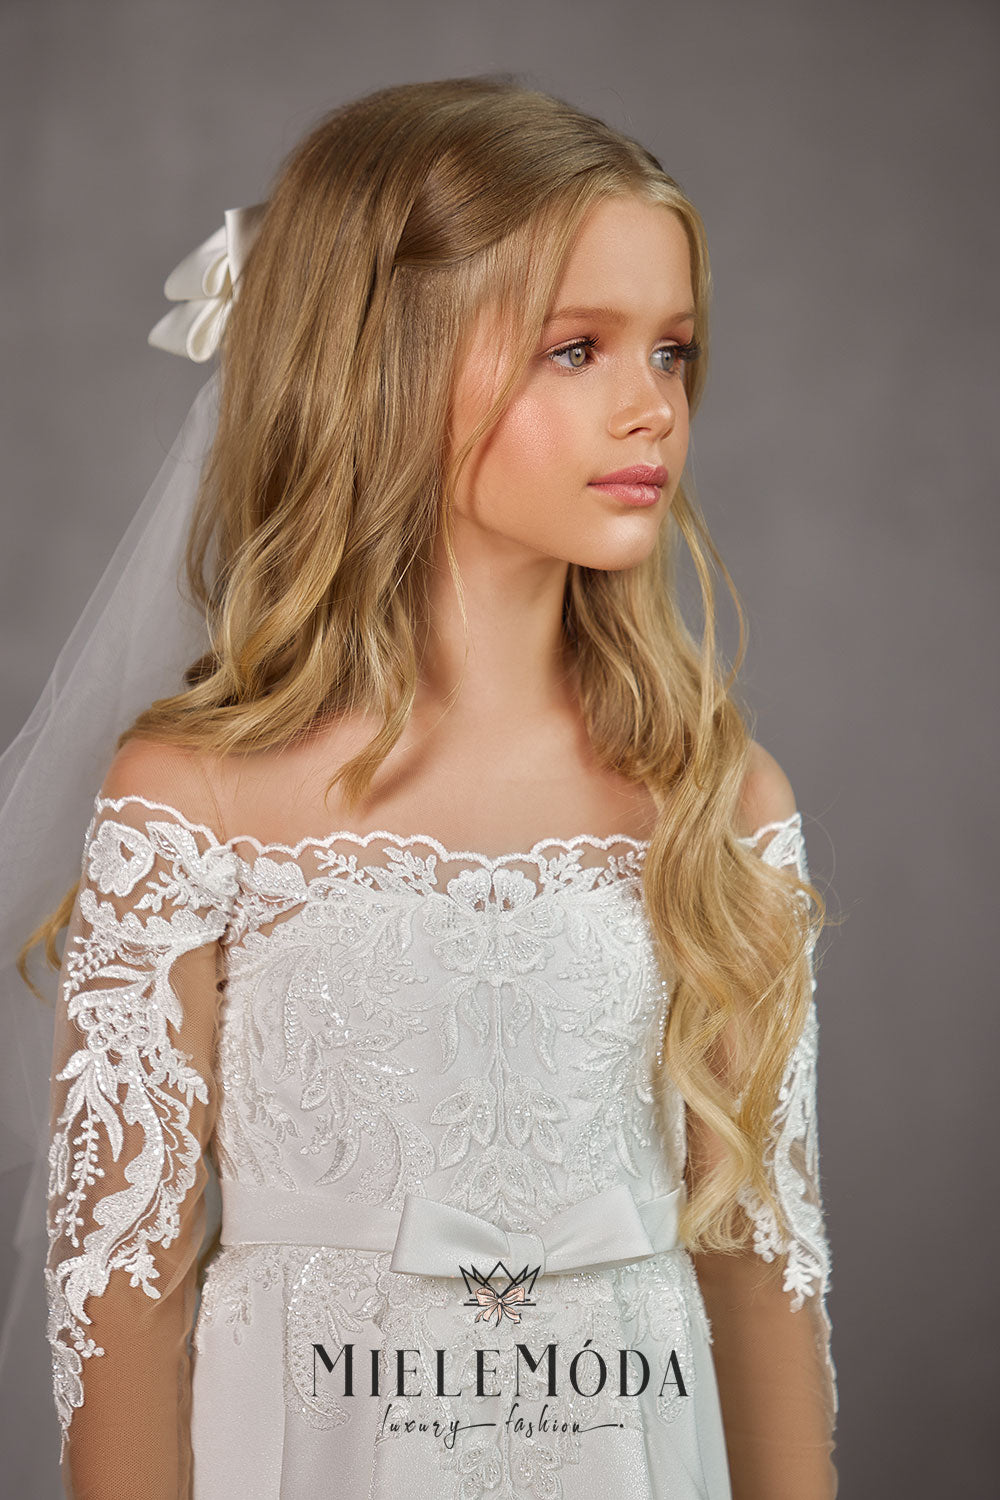 First Communion Luxury Layered Tulle Veil with Satin Bow